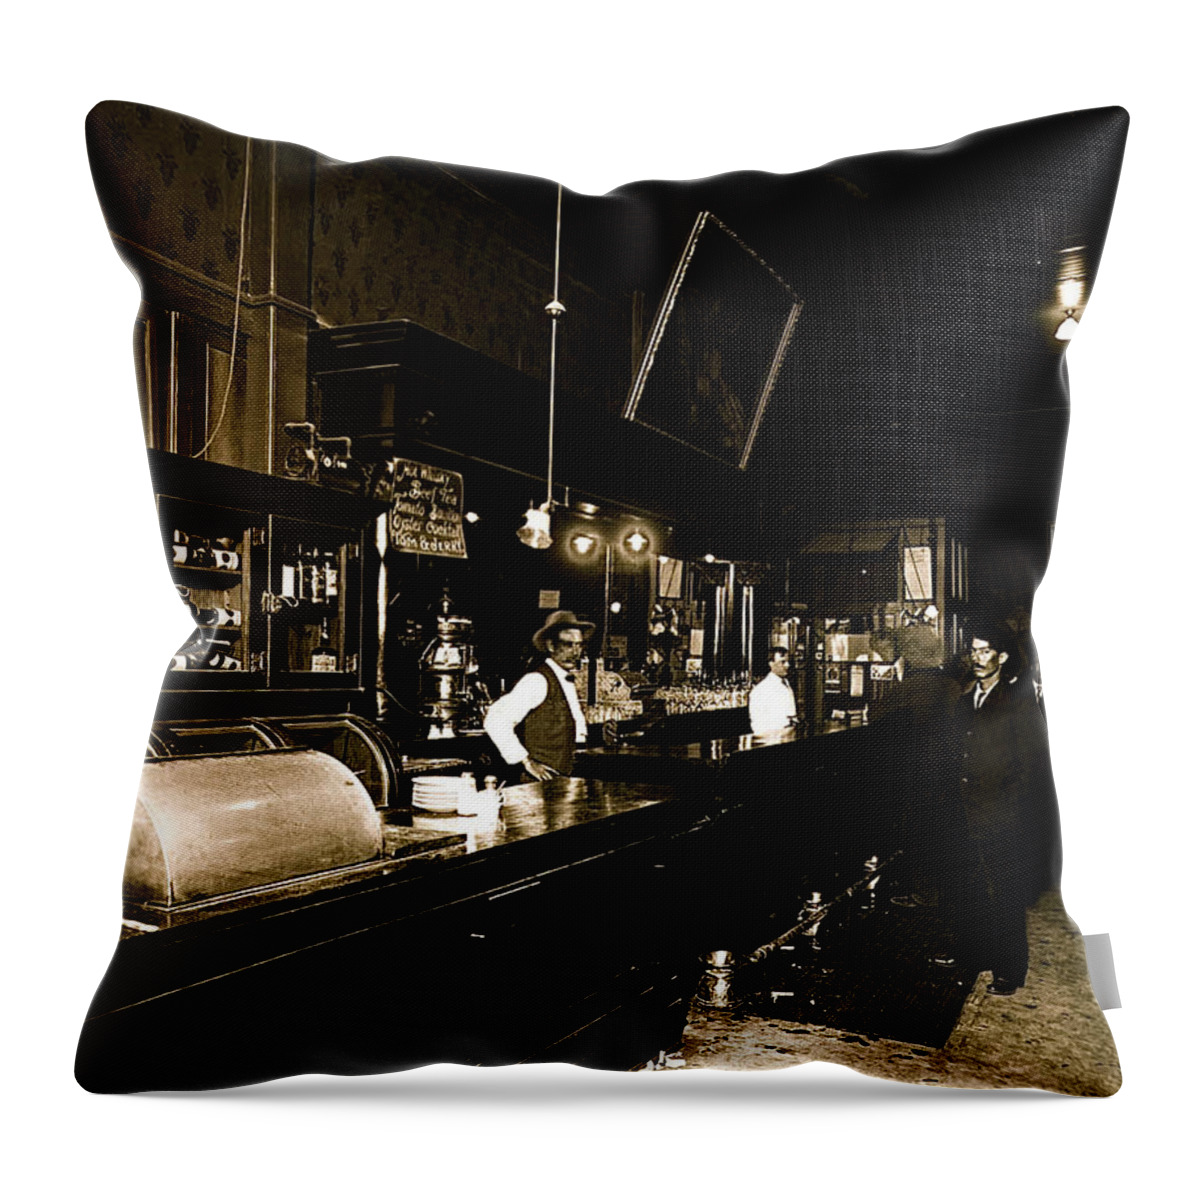 Cabinet Club Saloon 68 W. Congress Tucson Arizona C.1910-2008 Throw Pillow featuring the photograph Cabinet Club Saloon 68 W. Congress Tucson Arizona c.1910-2008 by David Lee Guss